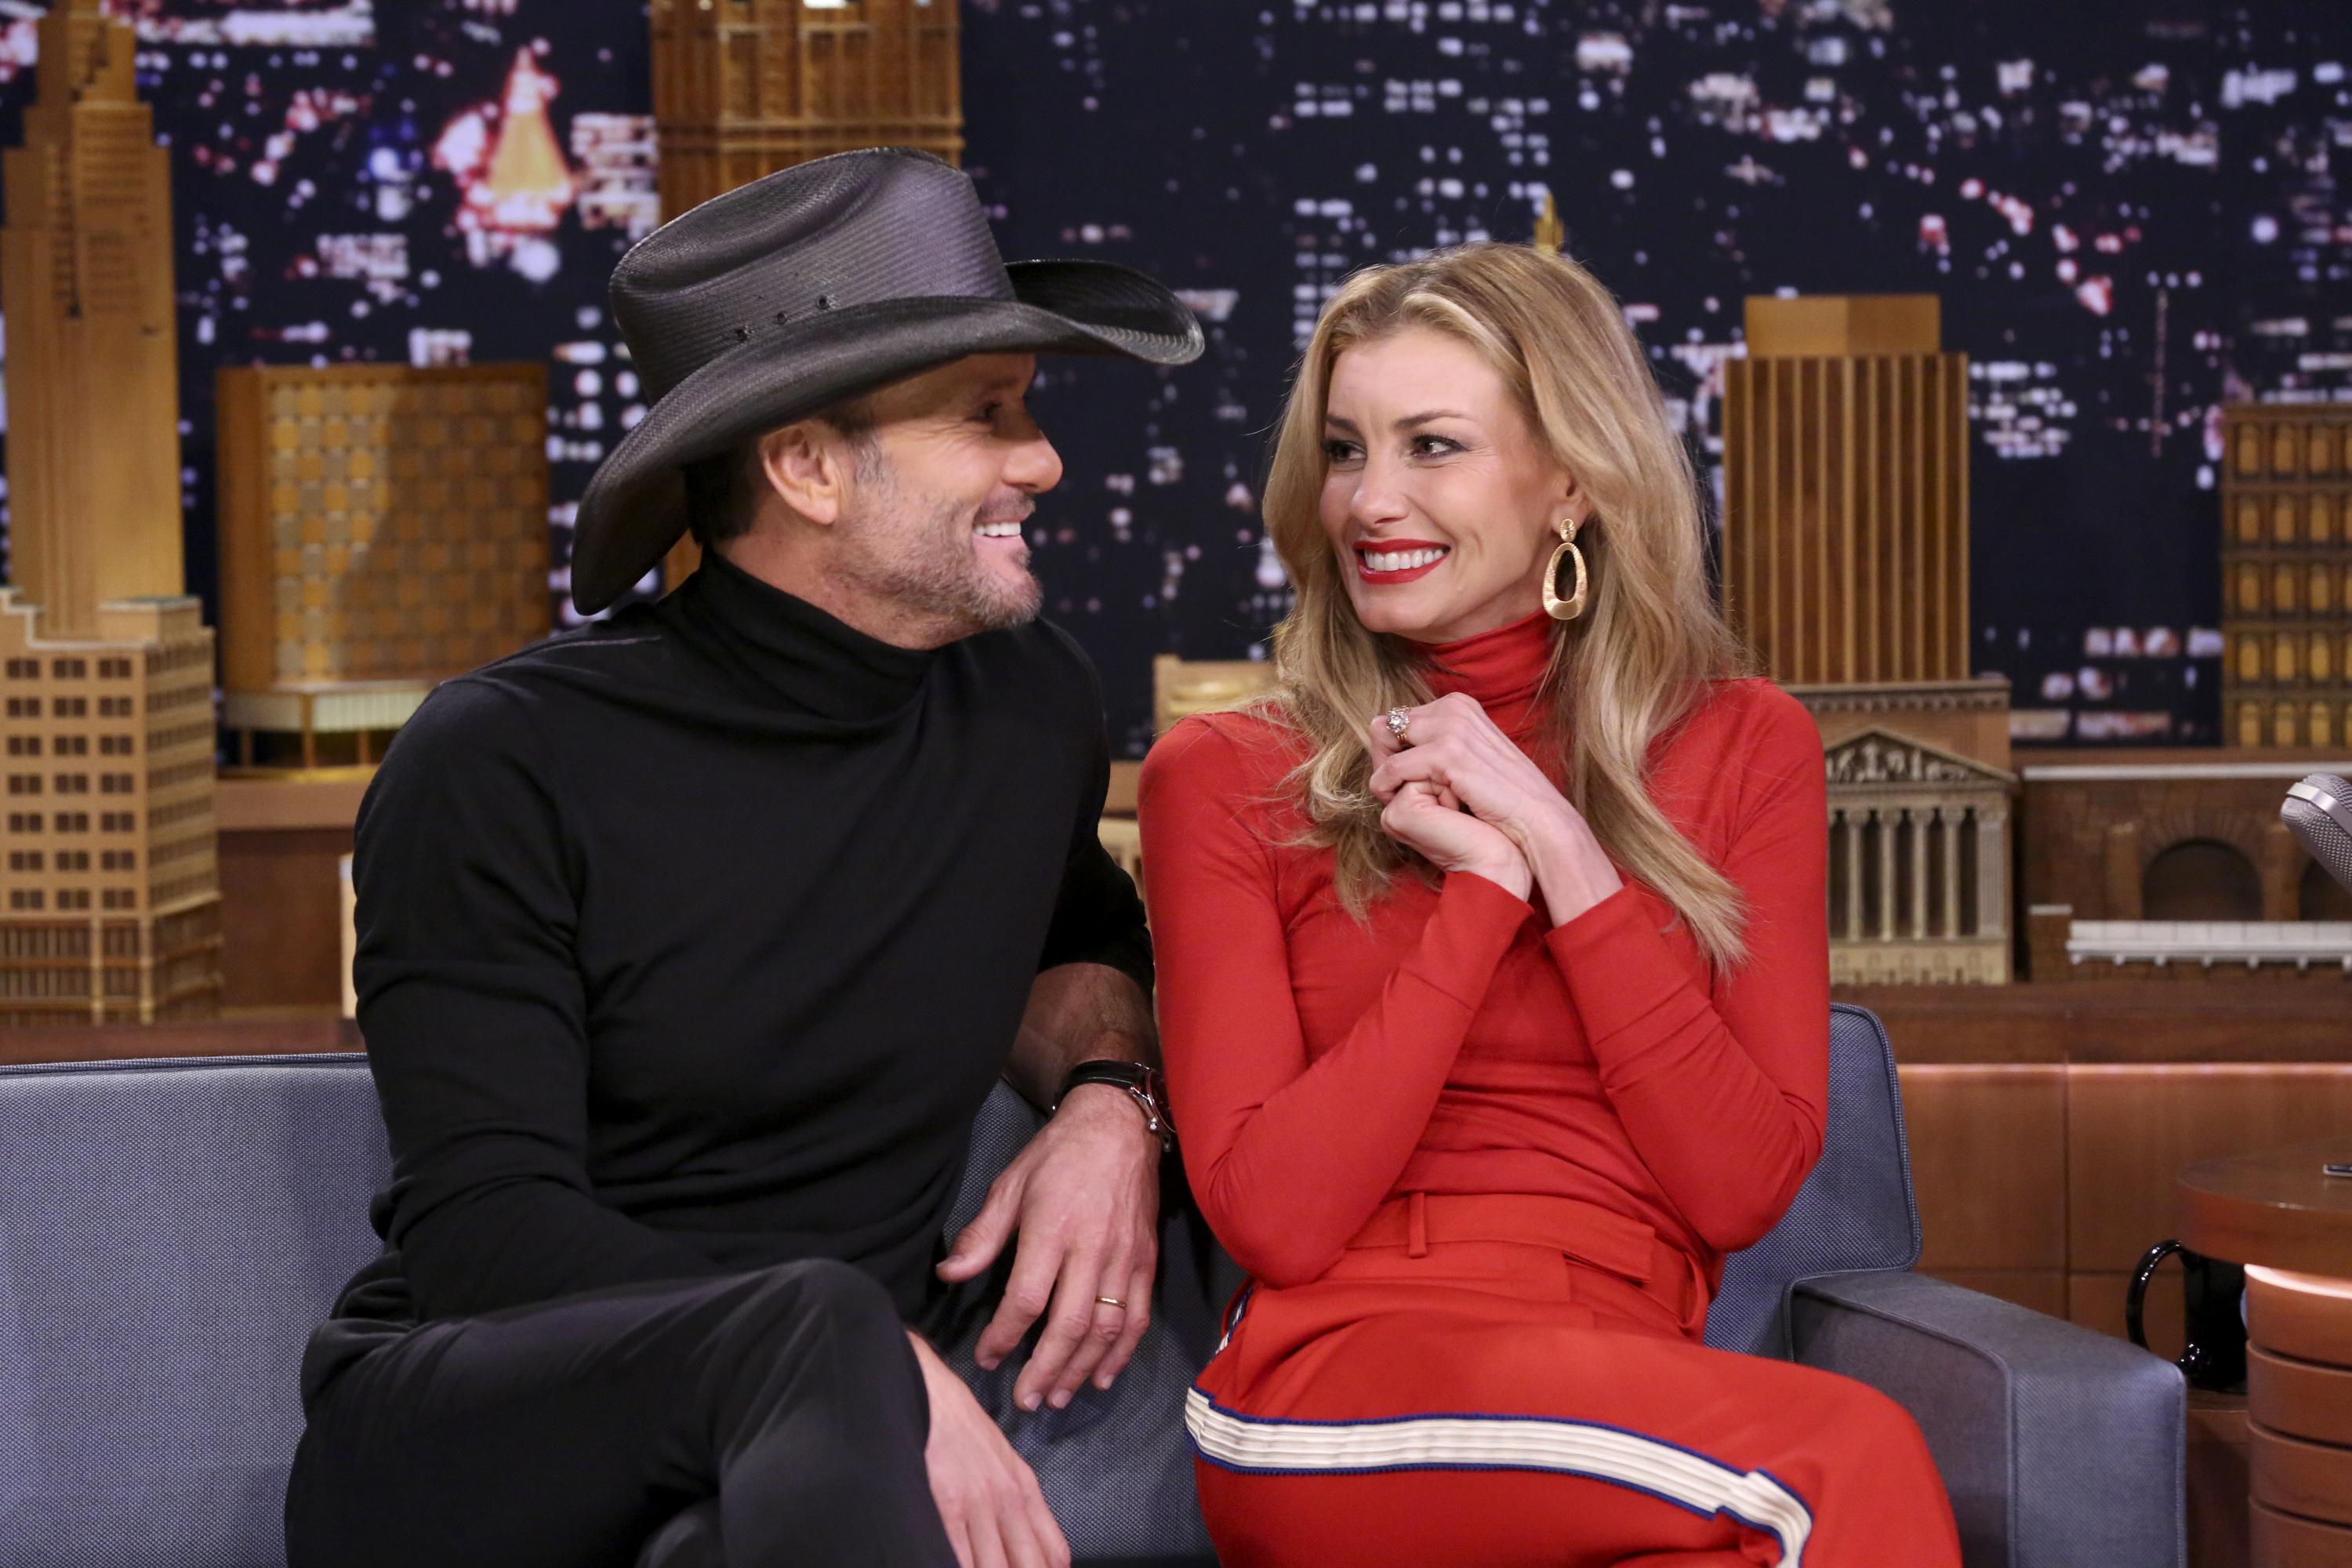 Tim McGraw and Faith Hill's daughter celebrates very famous